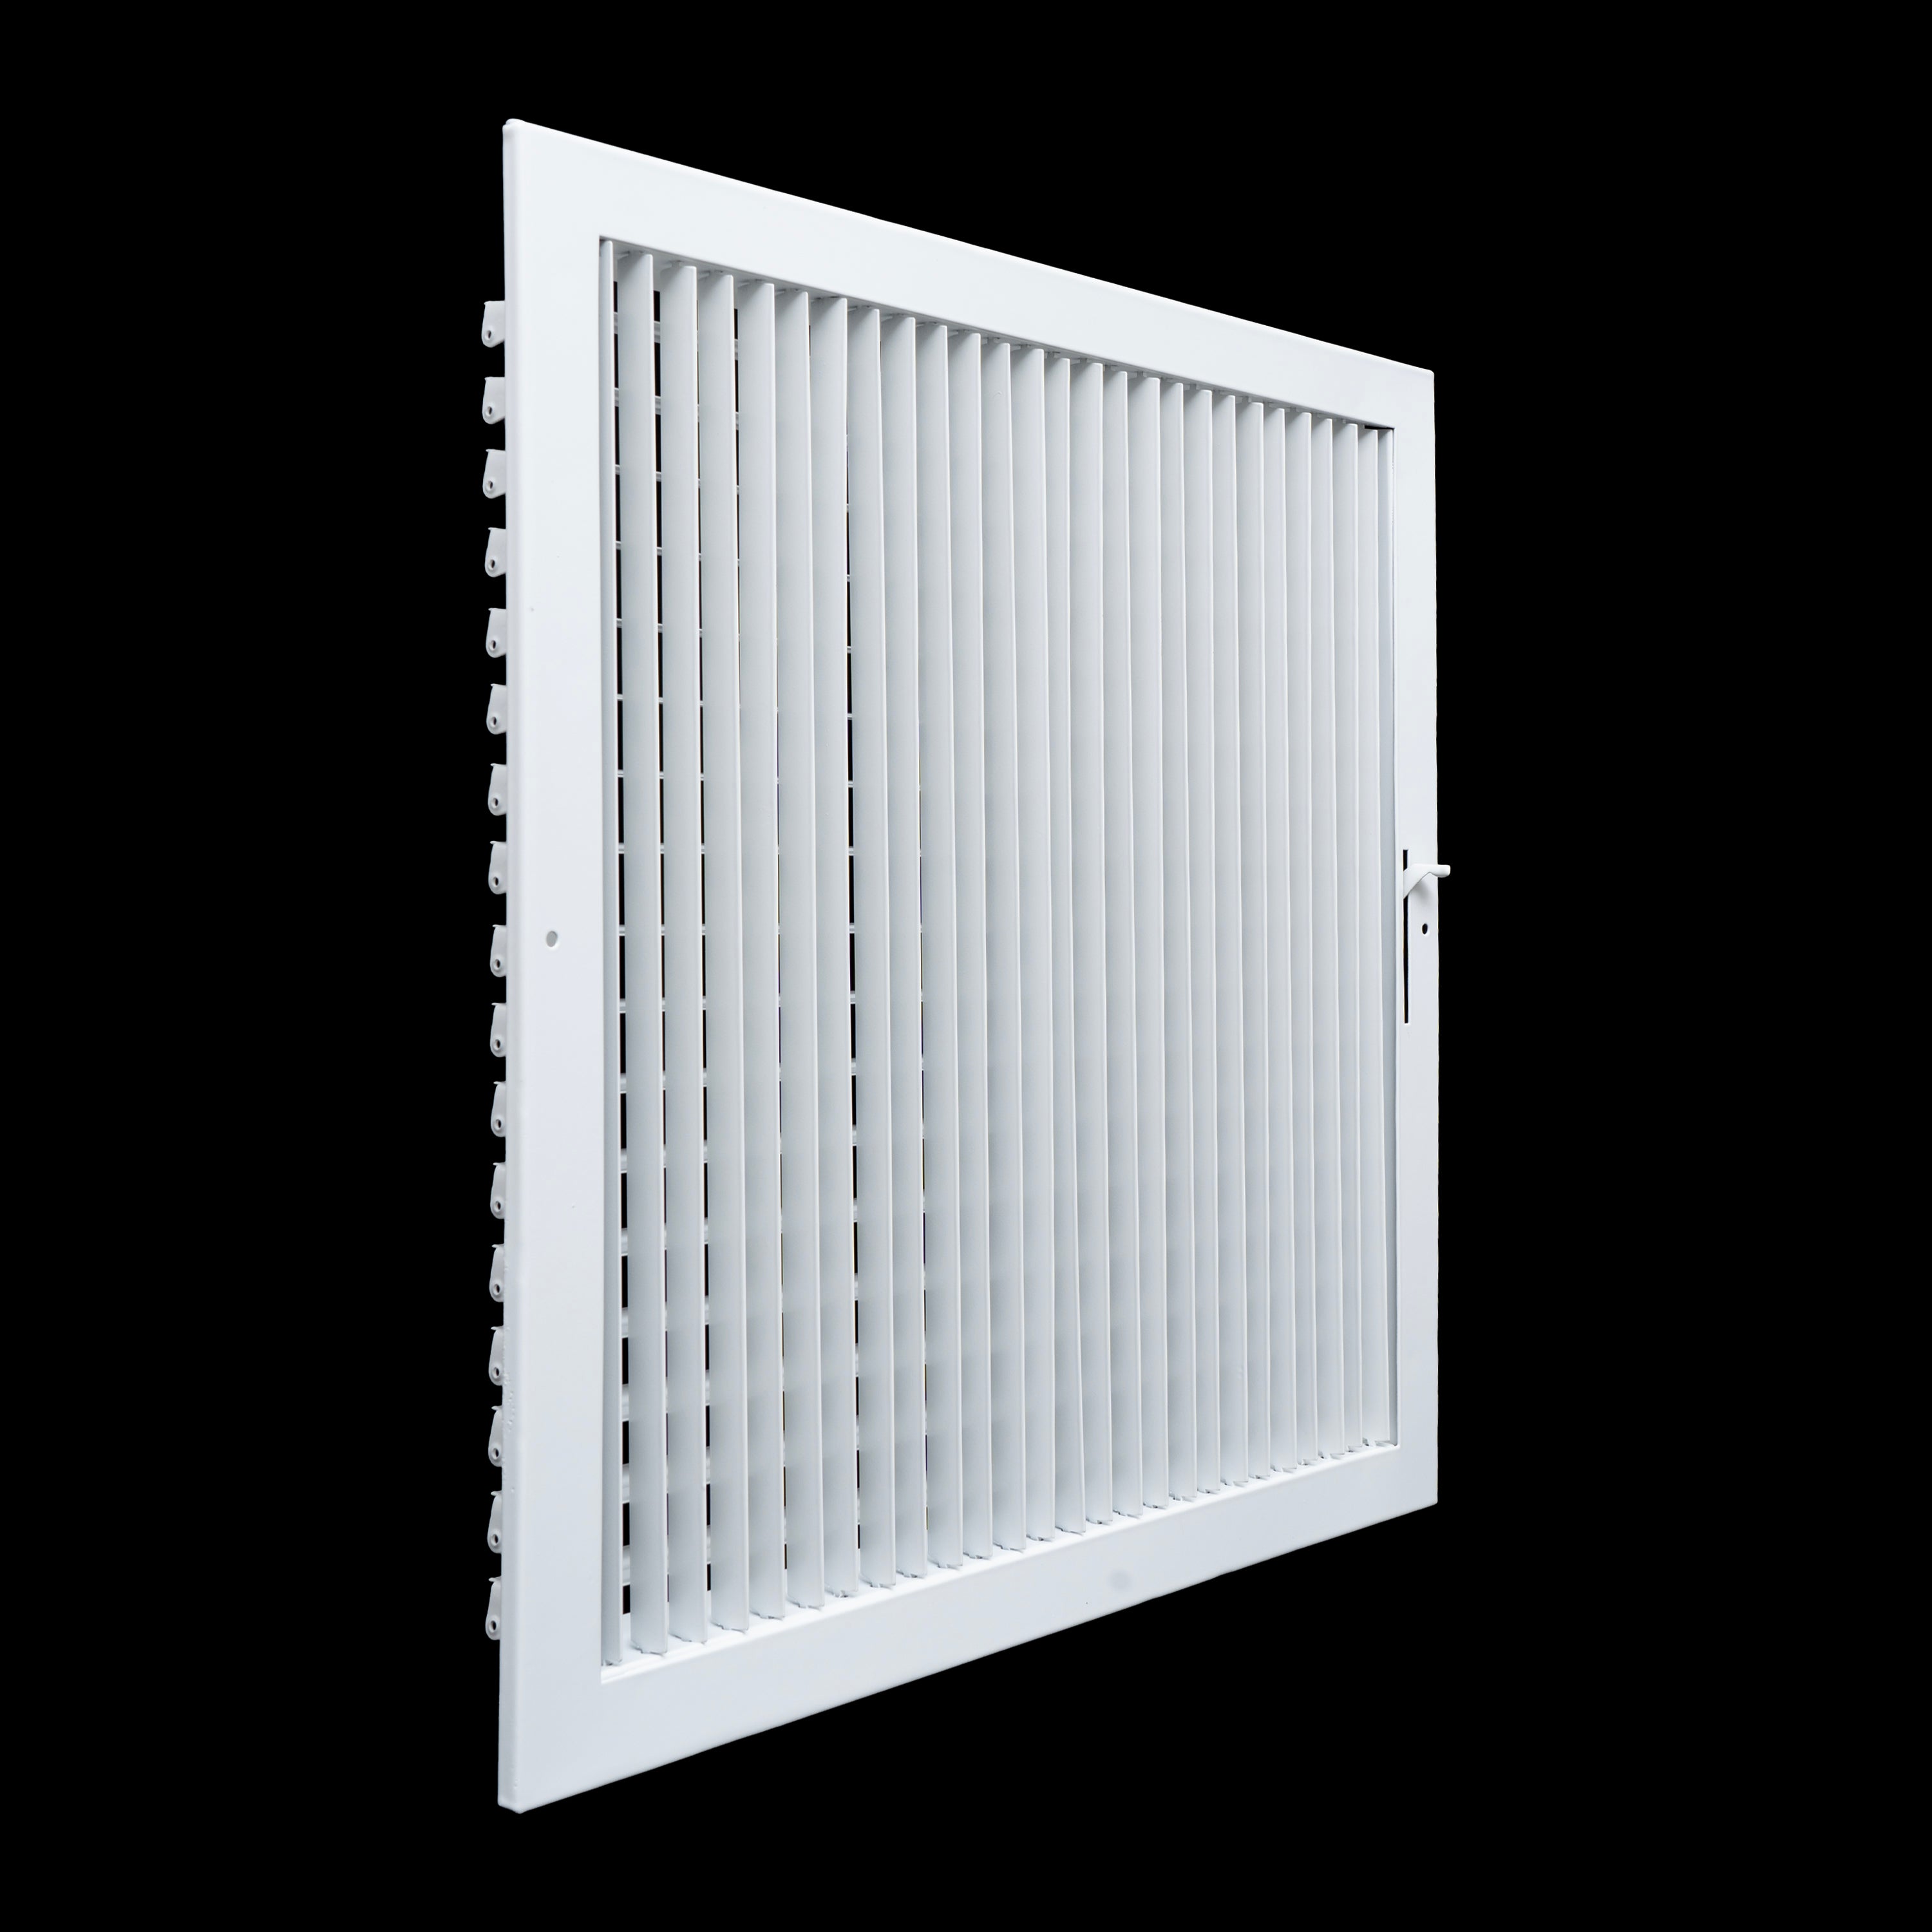 18"W x 18"H  Steel Adjustable Air Supply Grille | Register Vent Cover Grill for Sidewall and Ceiling | White | Outer Dimensions: 19.75"W X 19.75"H for 18x18 Duct Opening